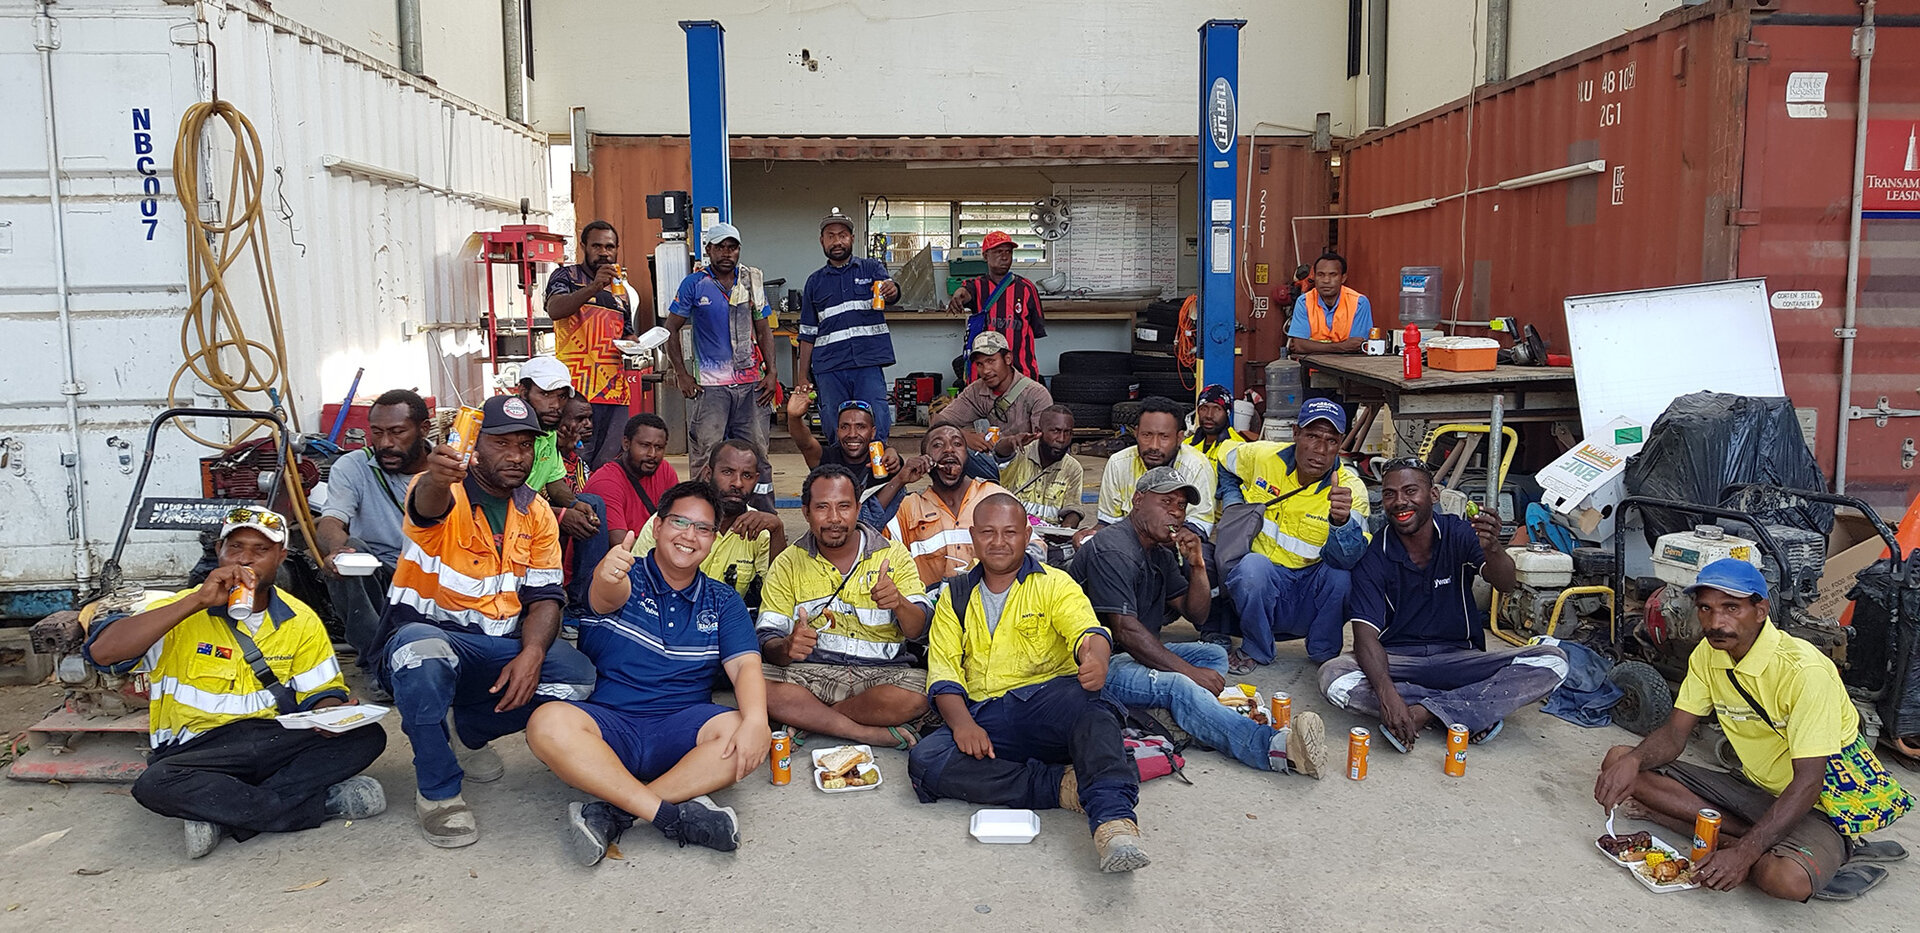 The Papua New Guinea Northbuild team sits together in a workshop for a group photo.